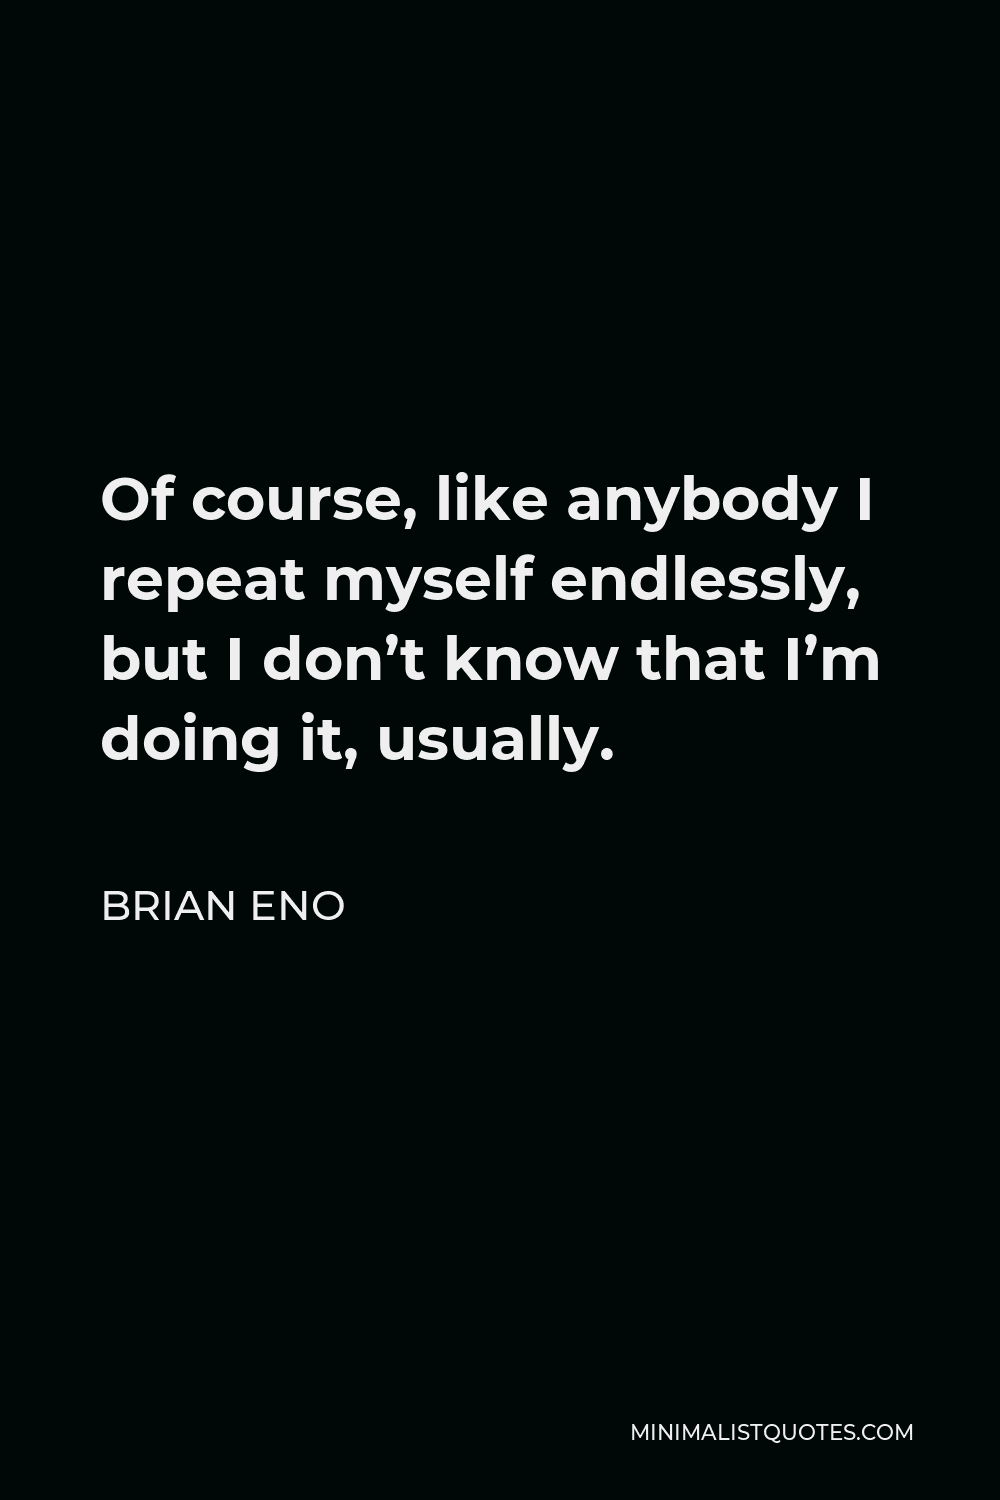 Brian Eno Quote - Of course, like anybody I repeat myself endlessly, but I don’t know that I’m doing it, usually.